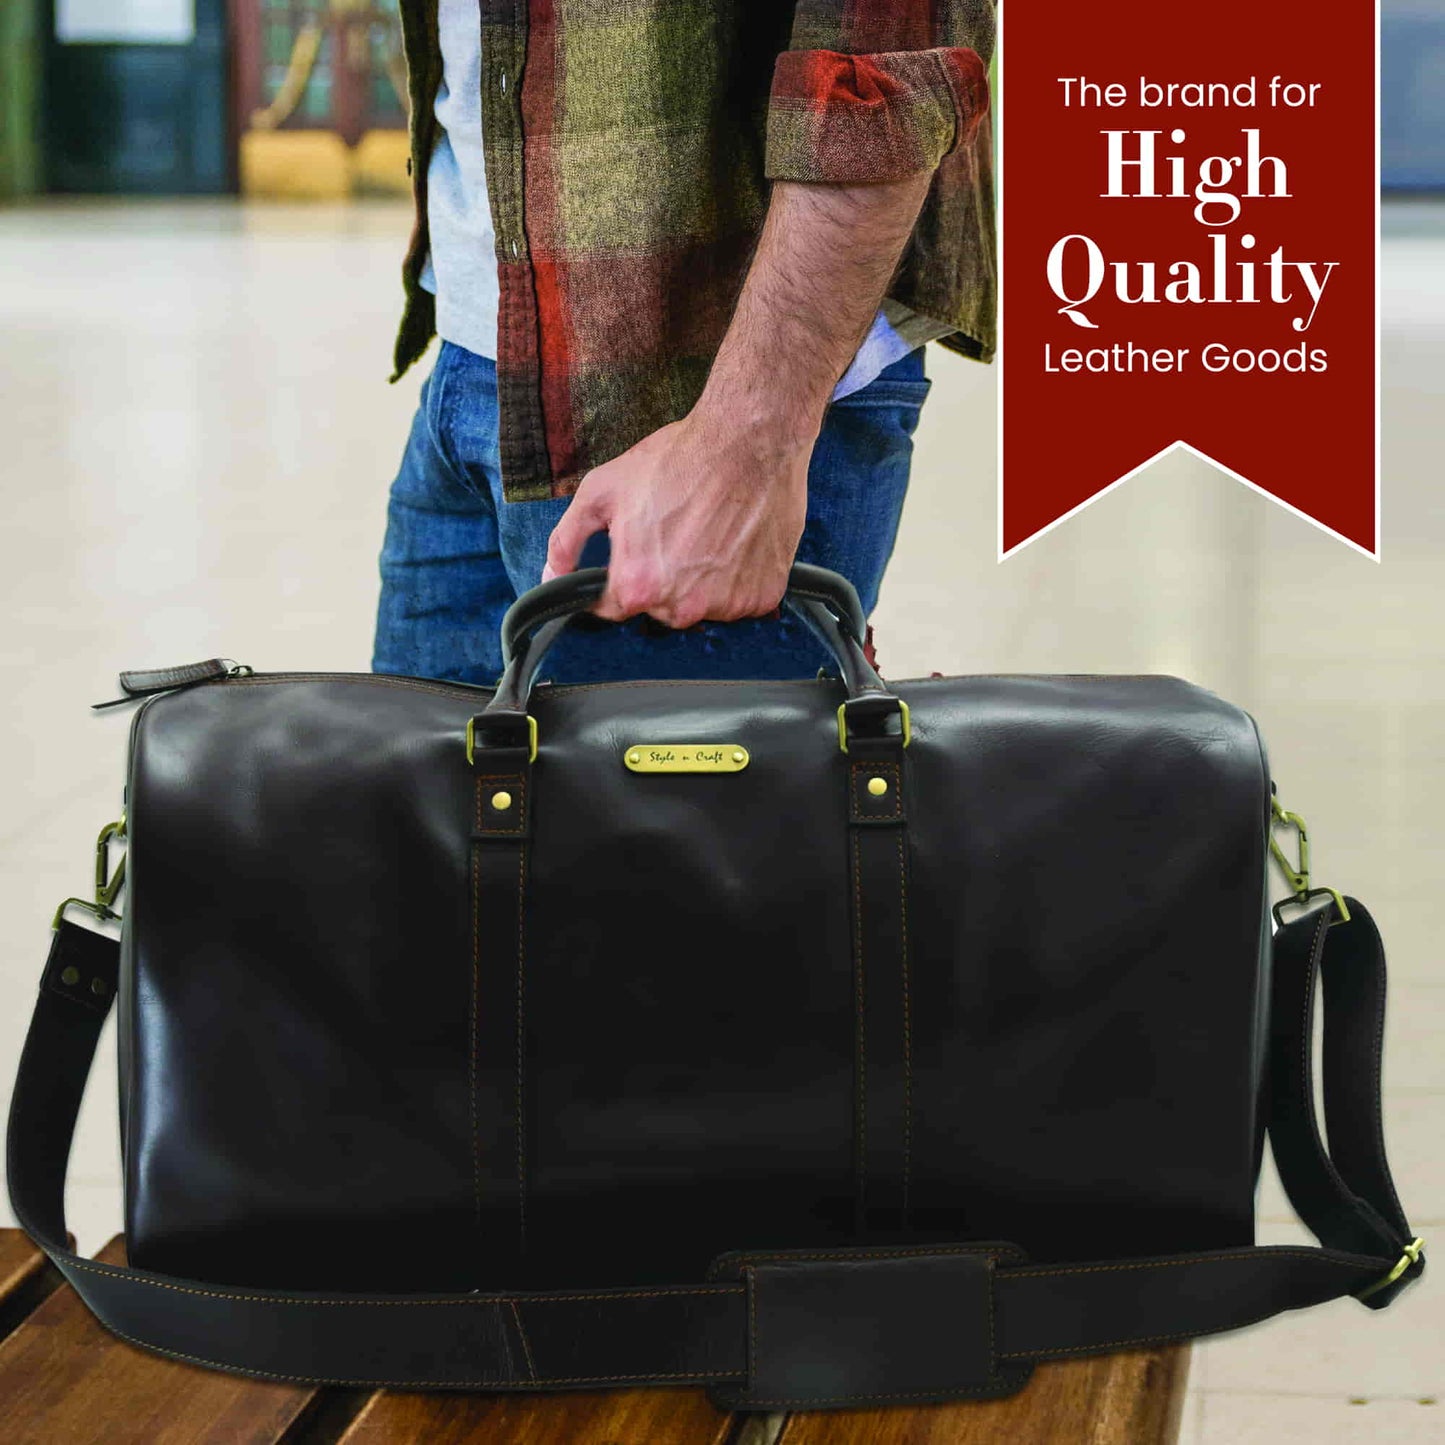 Style n Craft 392101 Duffle Bag in Full Grain Dark Brown Leather - Front View - Bag in Use 